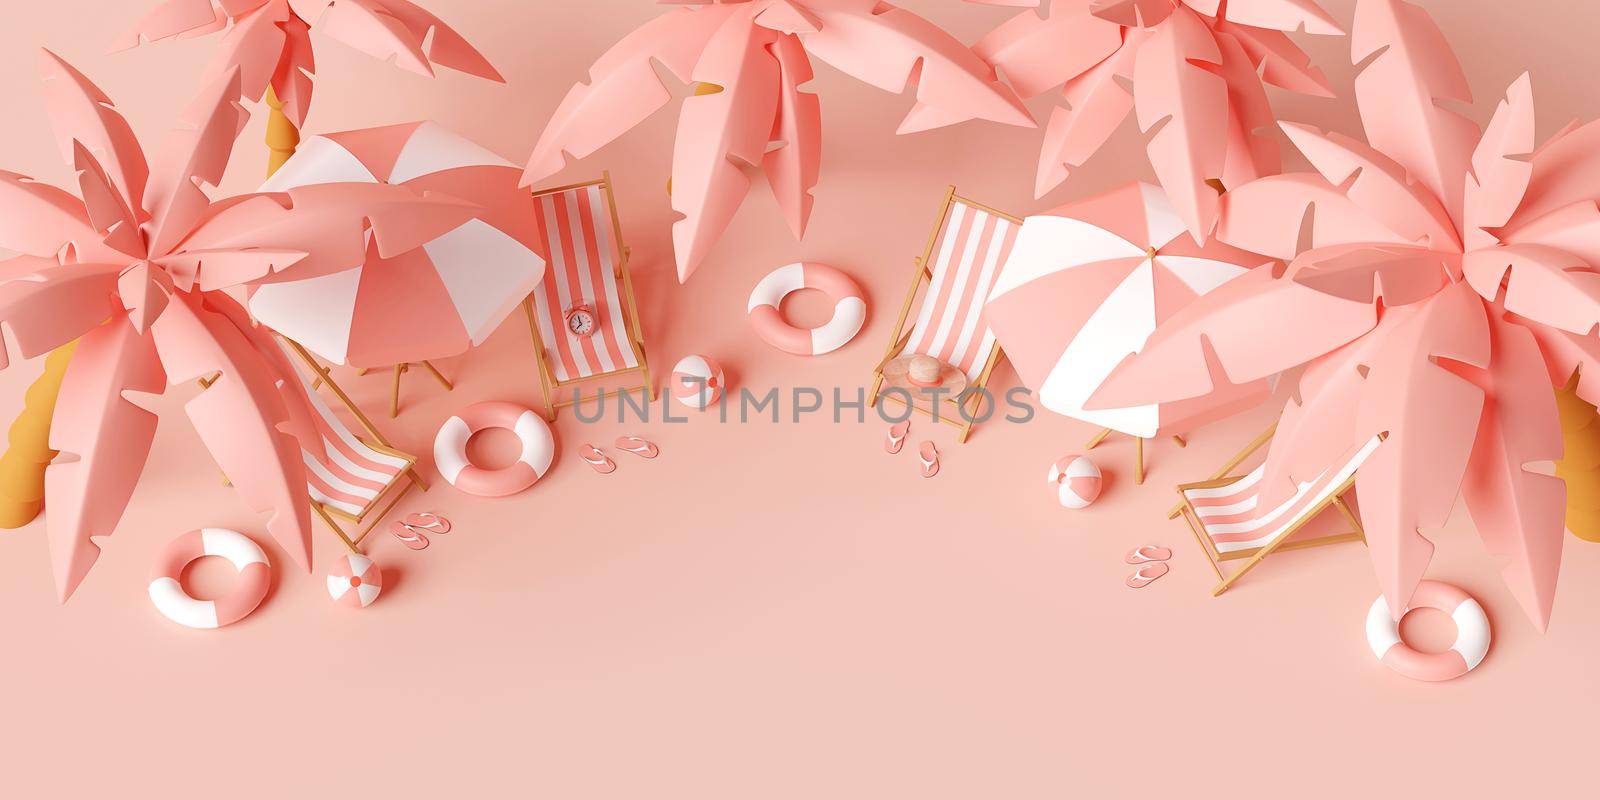 Summer vacation concept, Beach chairs and accessories under palm tree on pink background, 3d illustration by nutzchotwarut